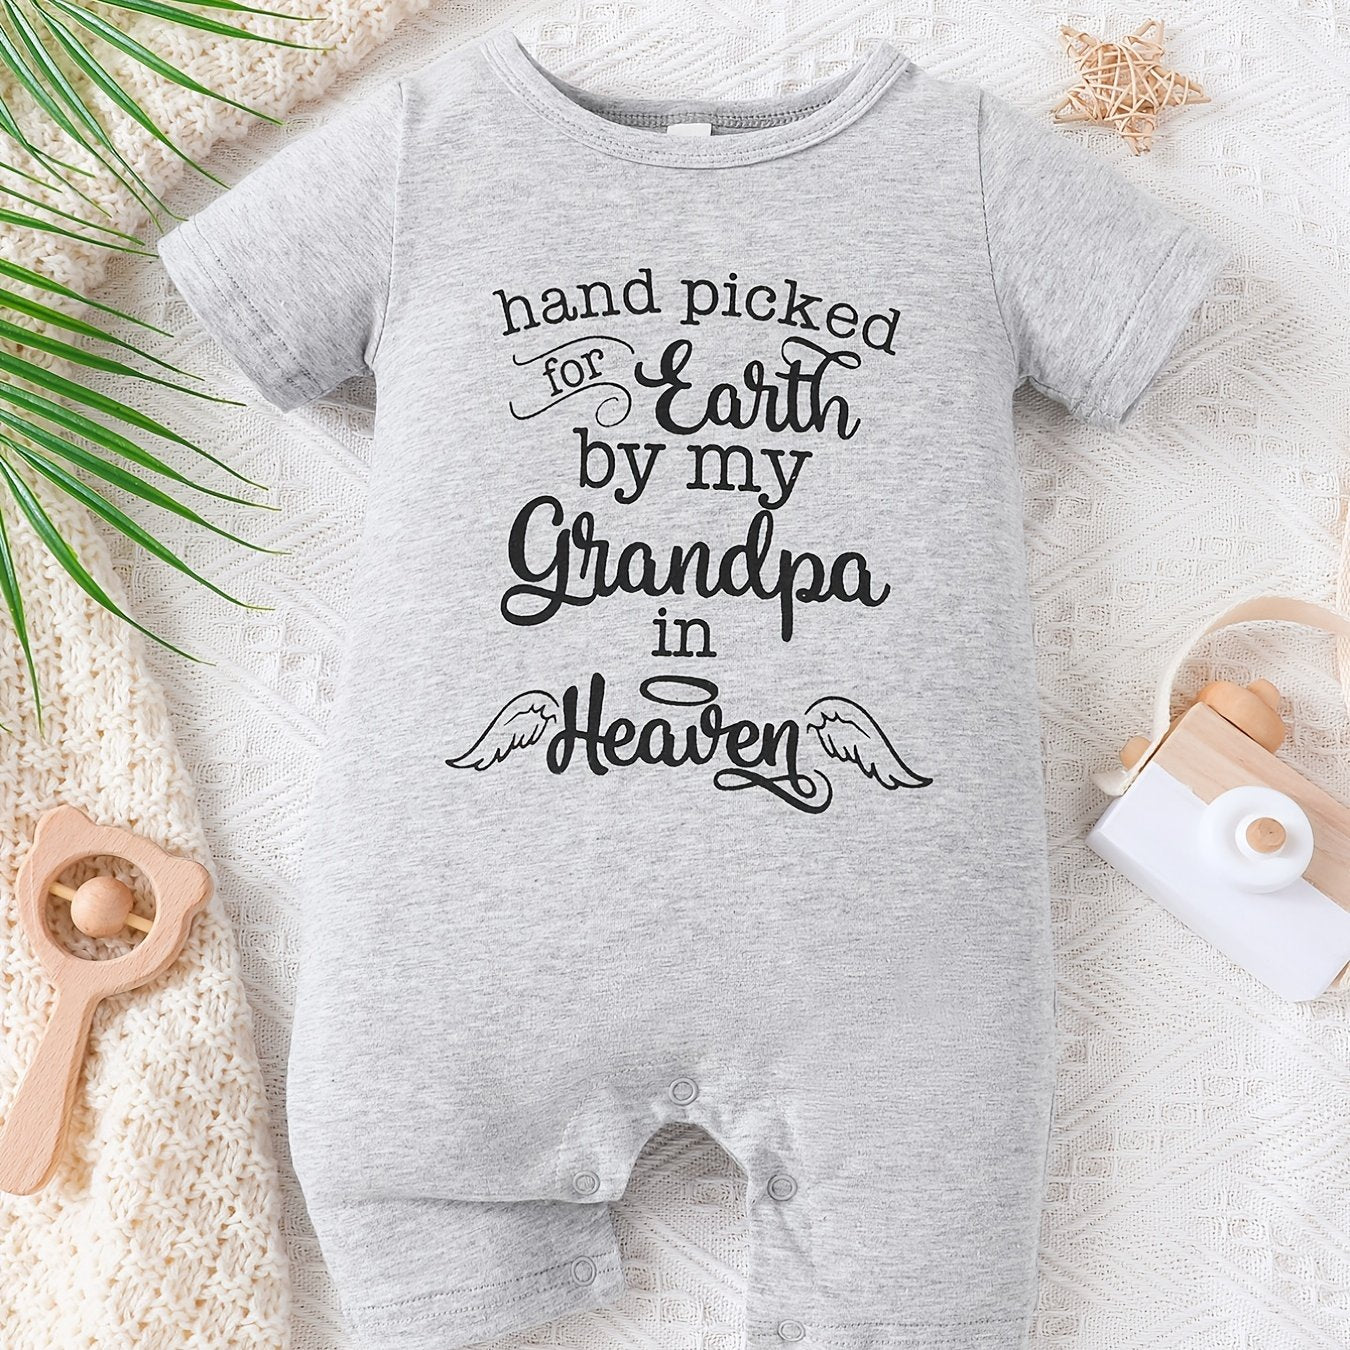 Hand Picked For Earth By My Grandpa In Heaven Christian Baby Onesie claimedbygoddesigns